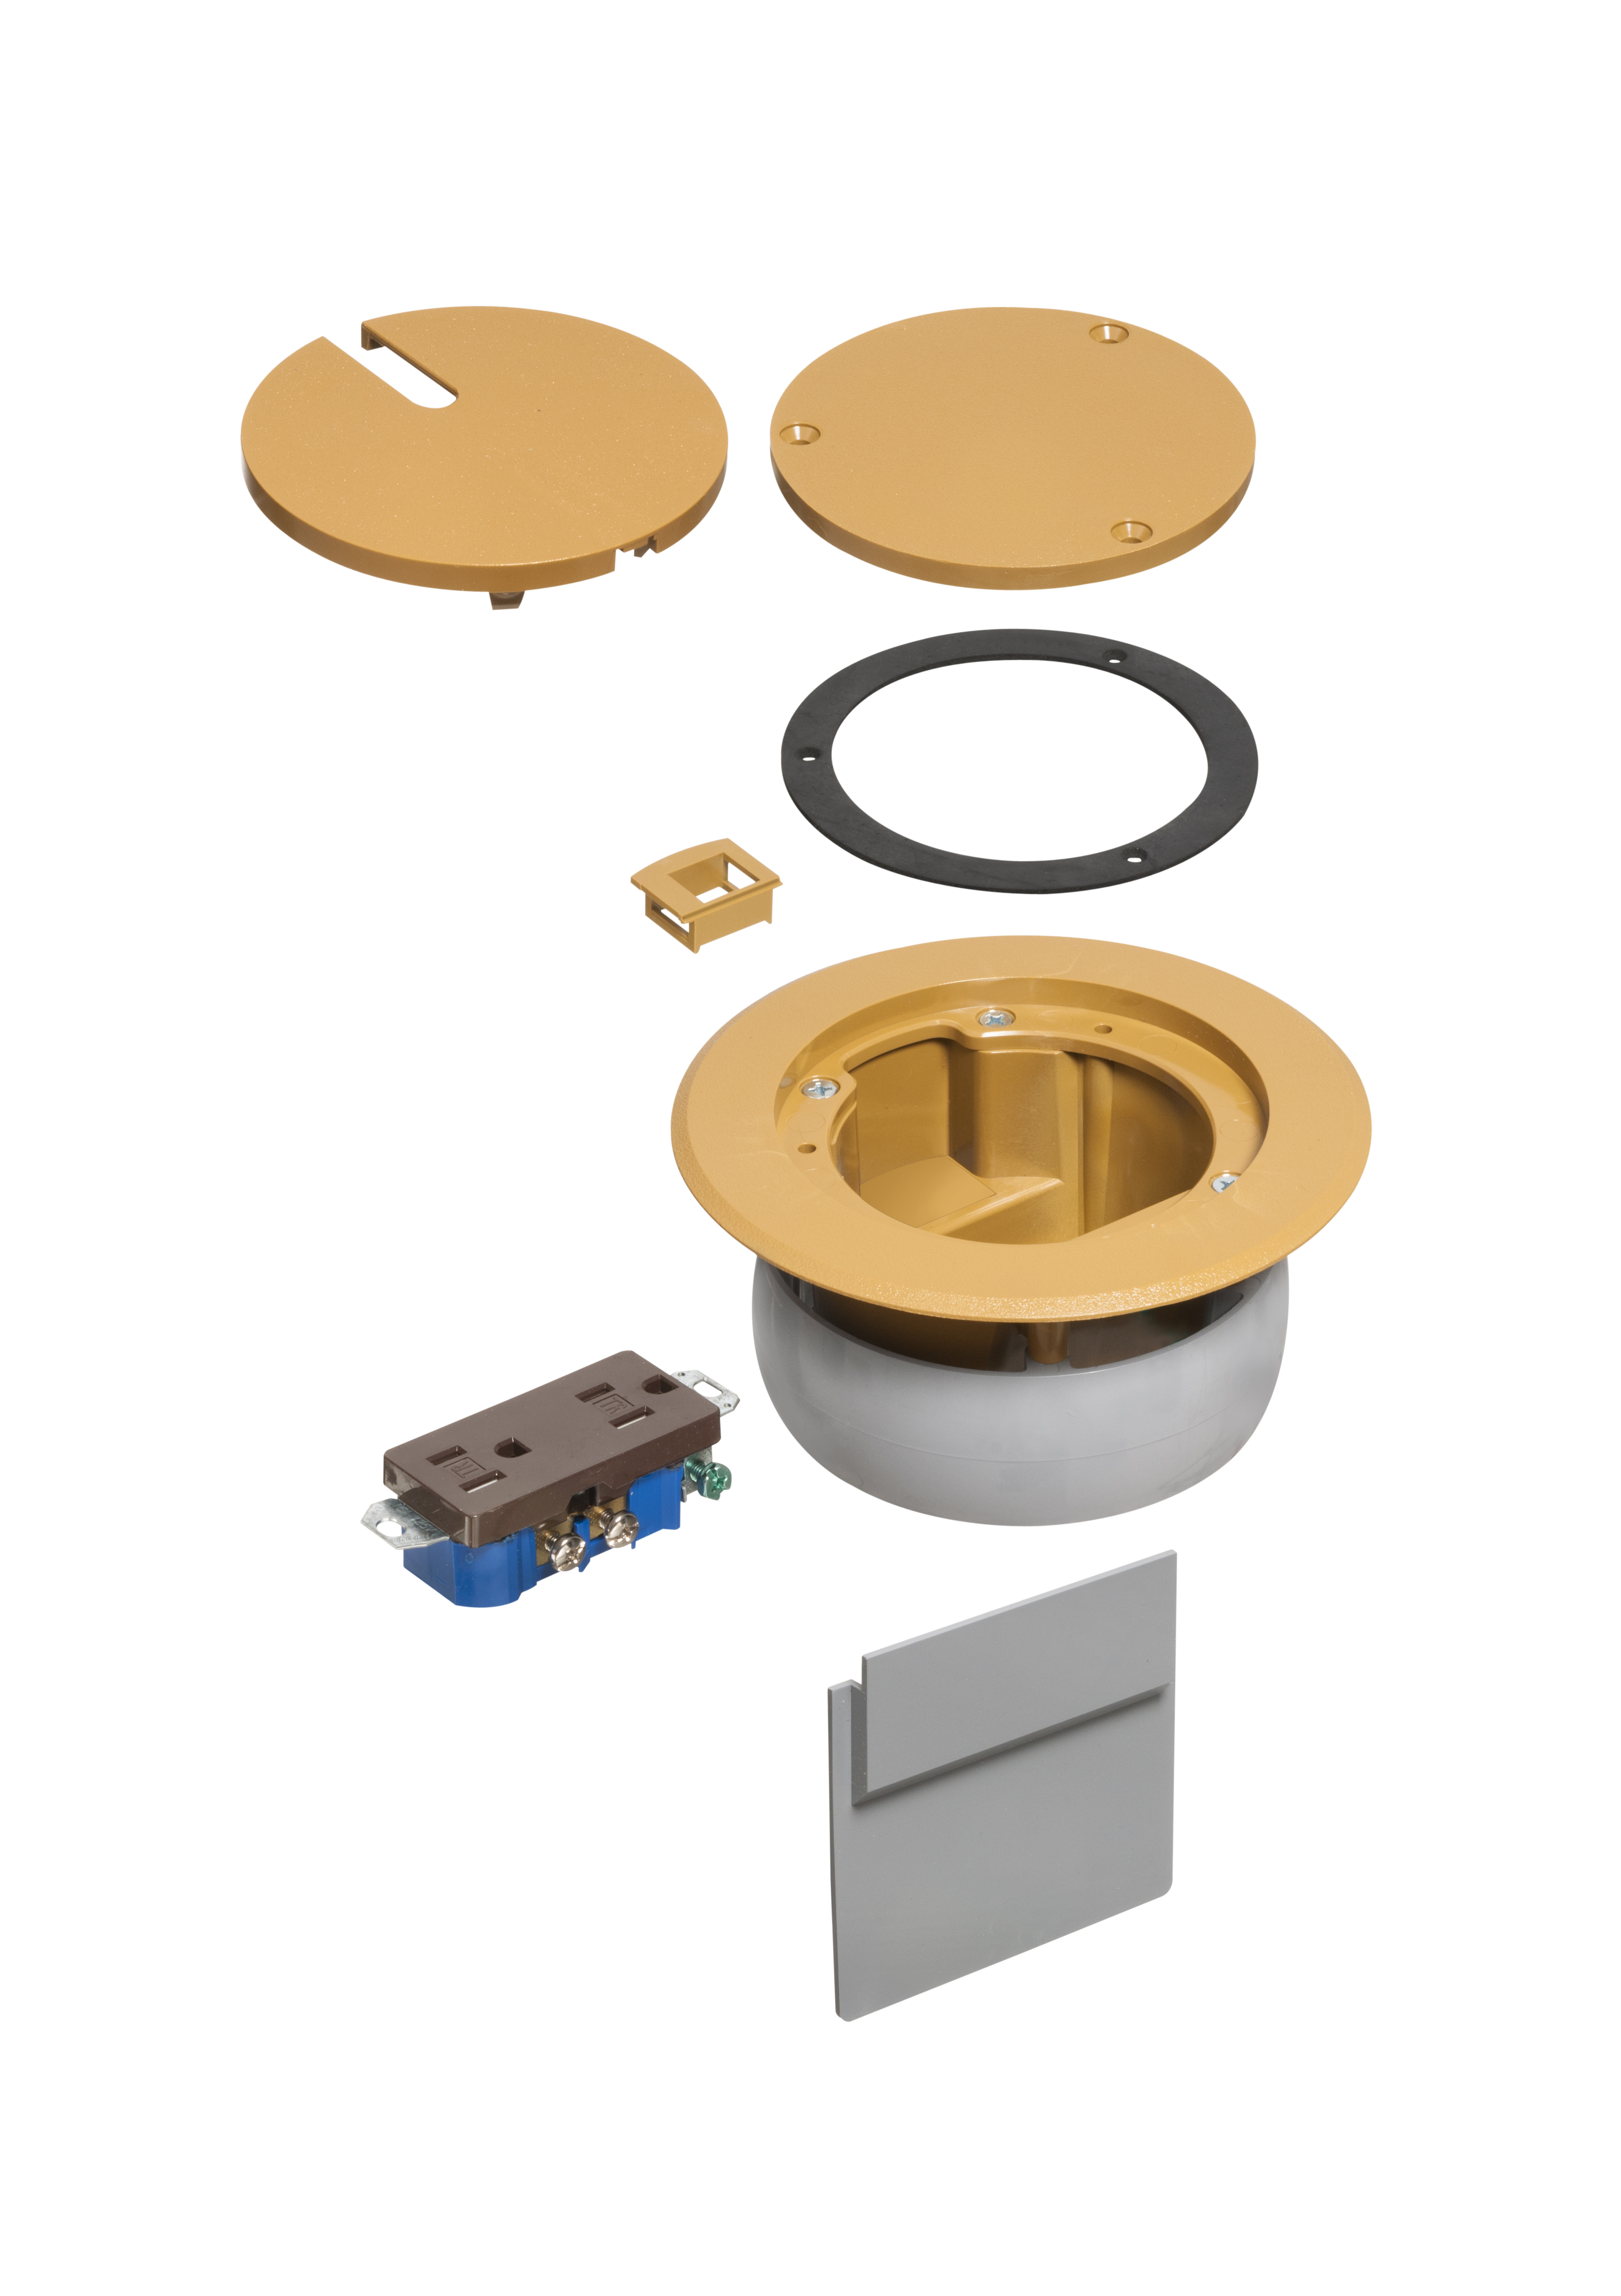 IN BOX cover kit. recessed receptacle and low voltage keystone for new concrete. Installs in Arlington's FLBC4500 and FLBC4502 box. Non metallic. Color Caramel.